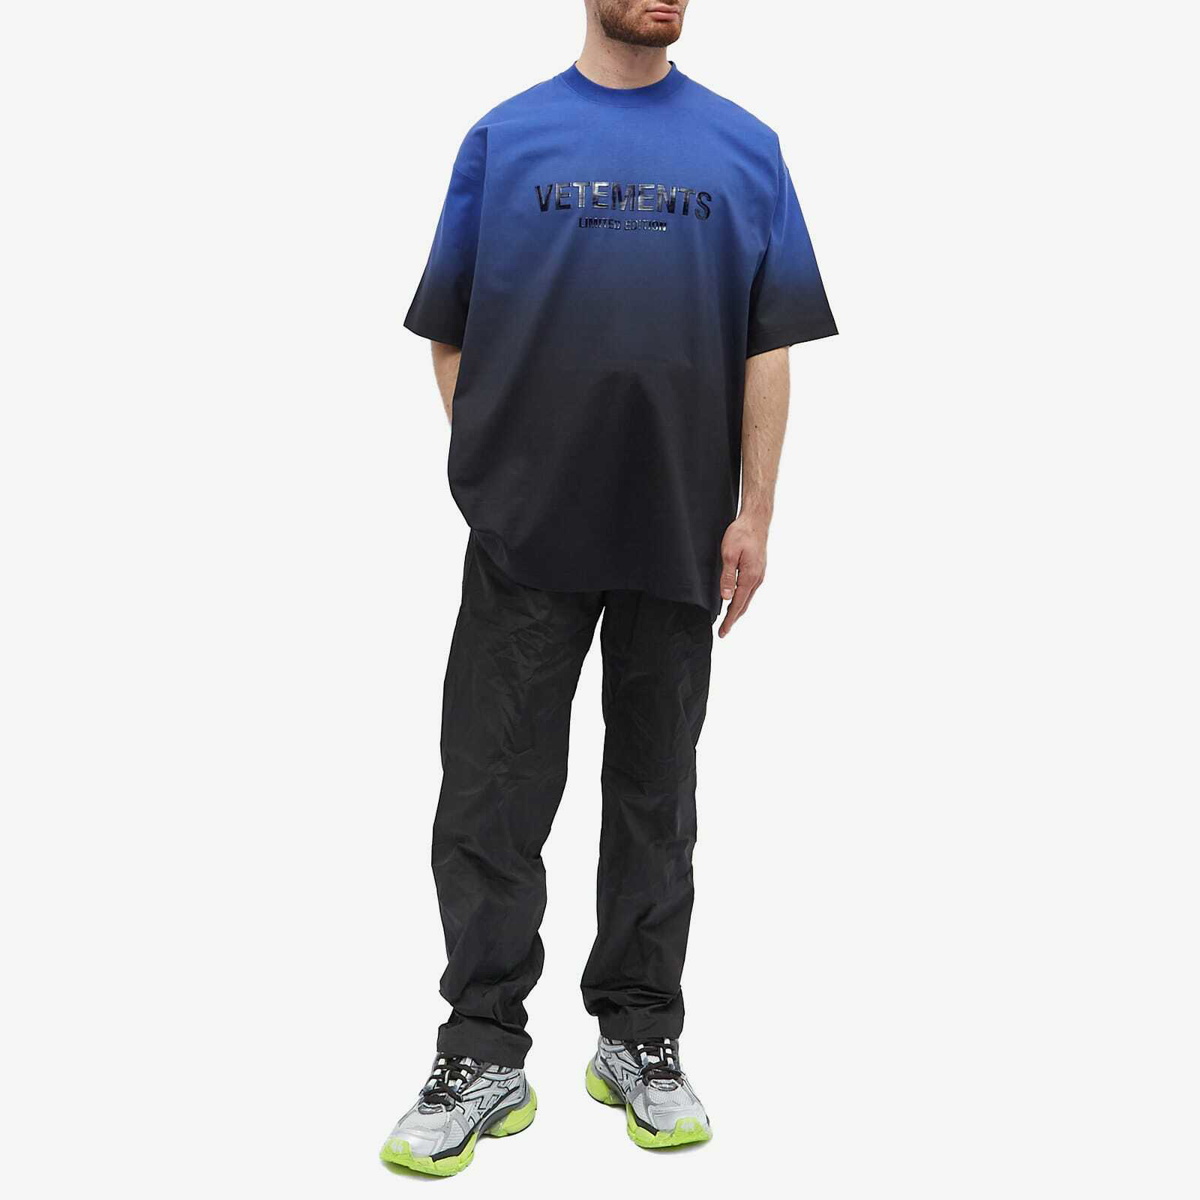 Vetements Gradient Logo Limited Edition T-Shirt in Royal Blue Vetements